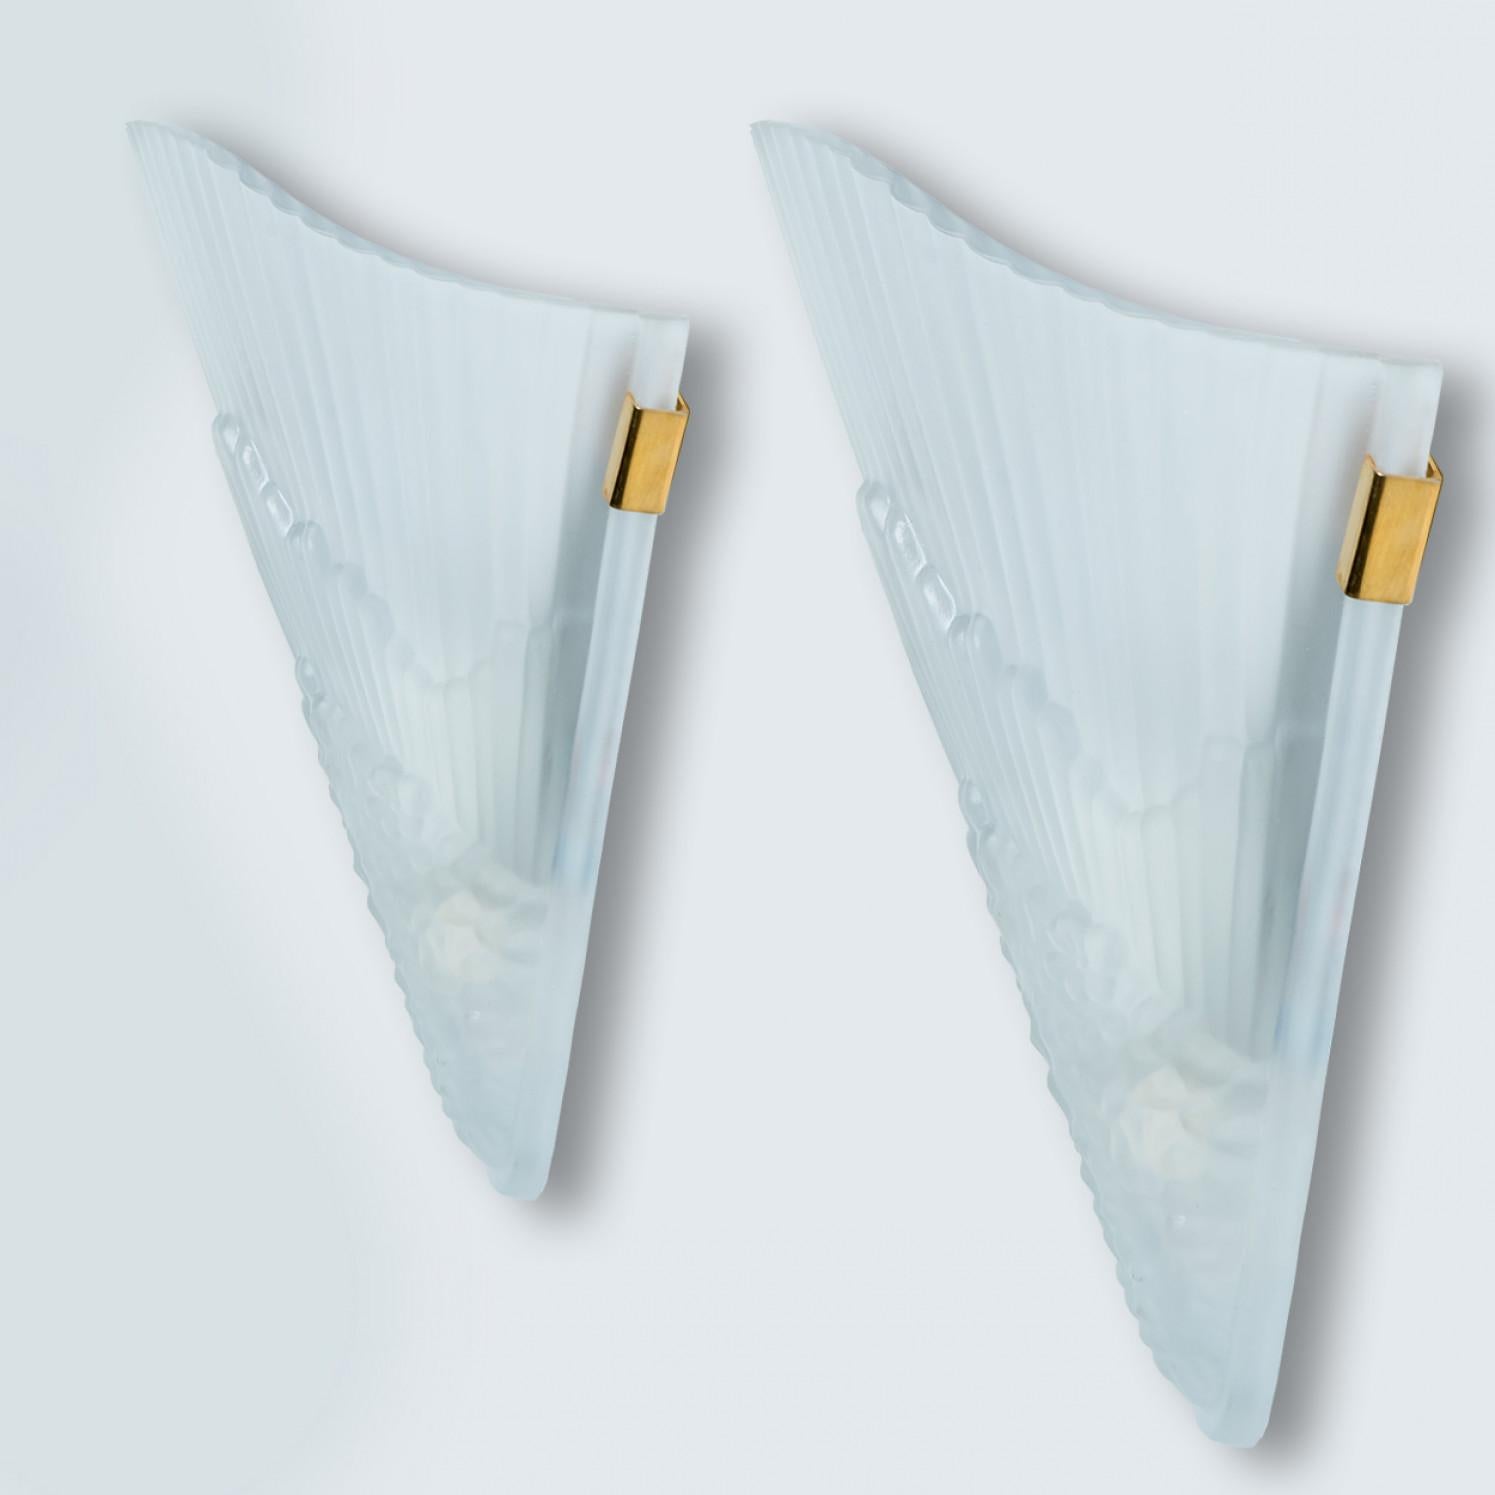 Art Deco style brass and frosted glass wall lights.  Manufactured in Italy around 1970.
With their clean modernist lines and beautiful attention to detail, these sconces would be a winning addition to any style of interior from classical decoration